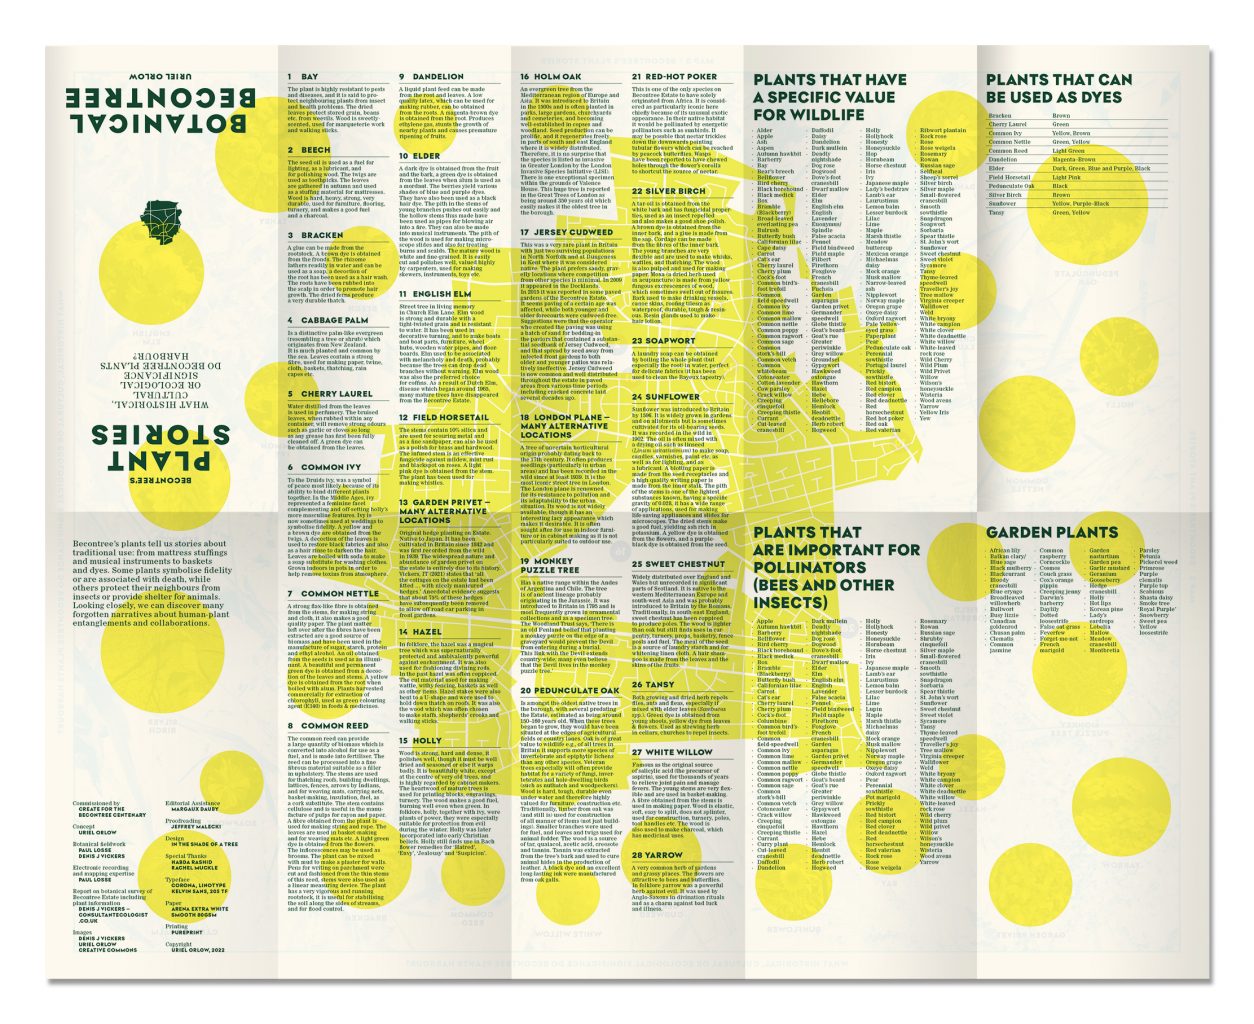 Folded and unfolded posters of Botanical Becontree, green and yellow, a survey lead by Uriel Orlow